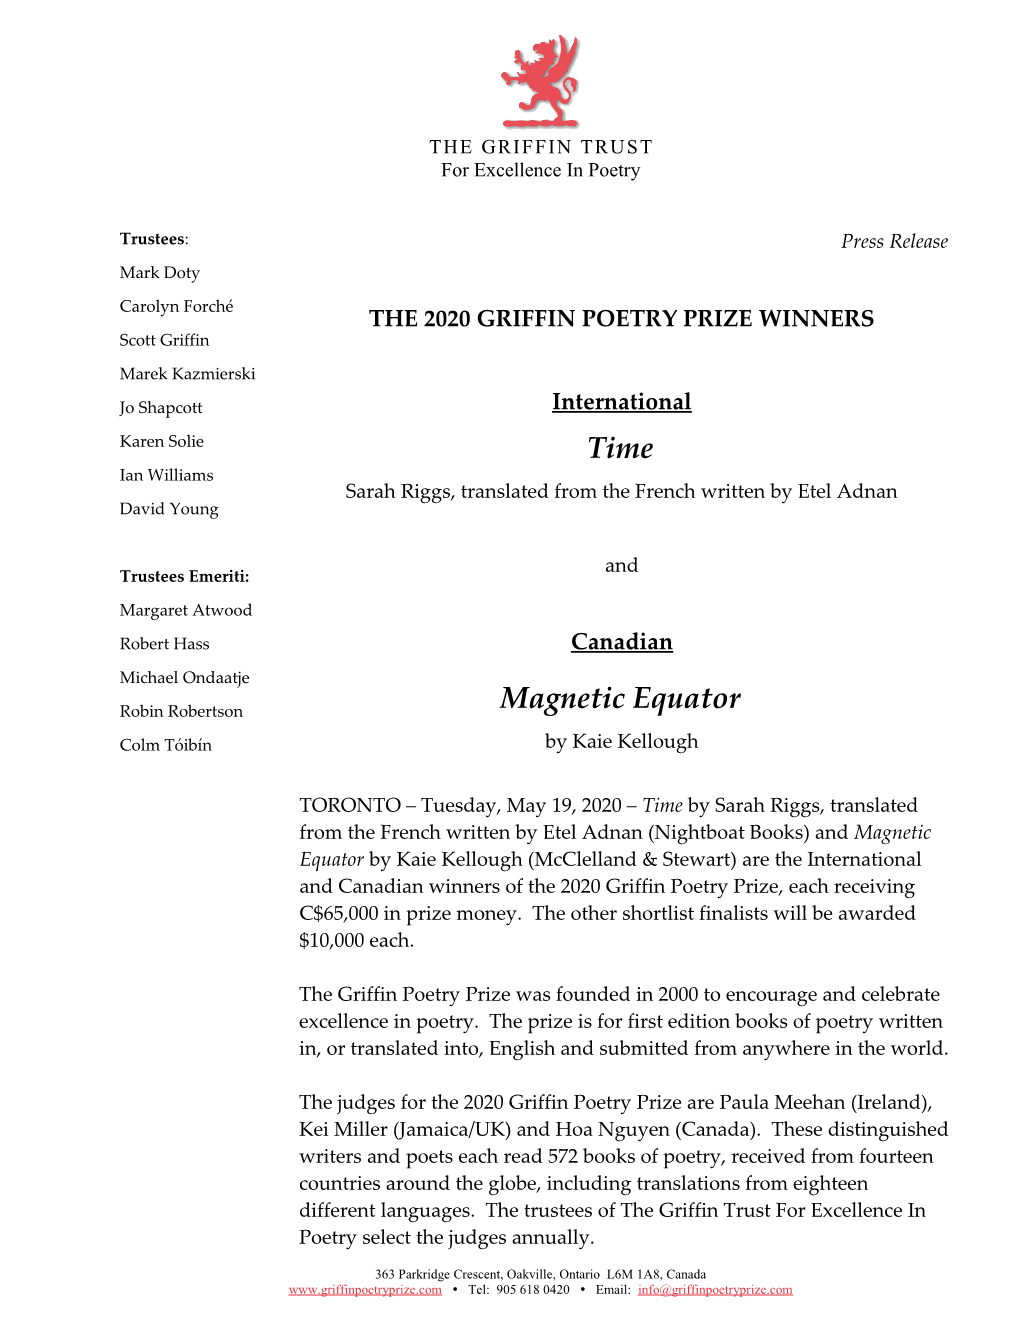 The Griffin Poetry Prize Announces the 2020 International And